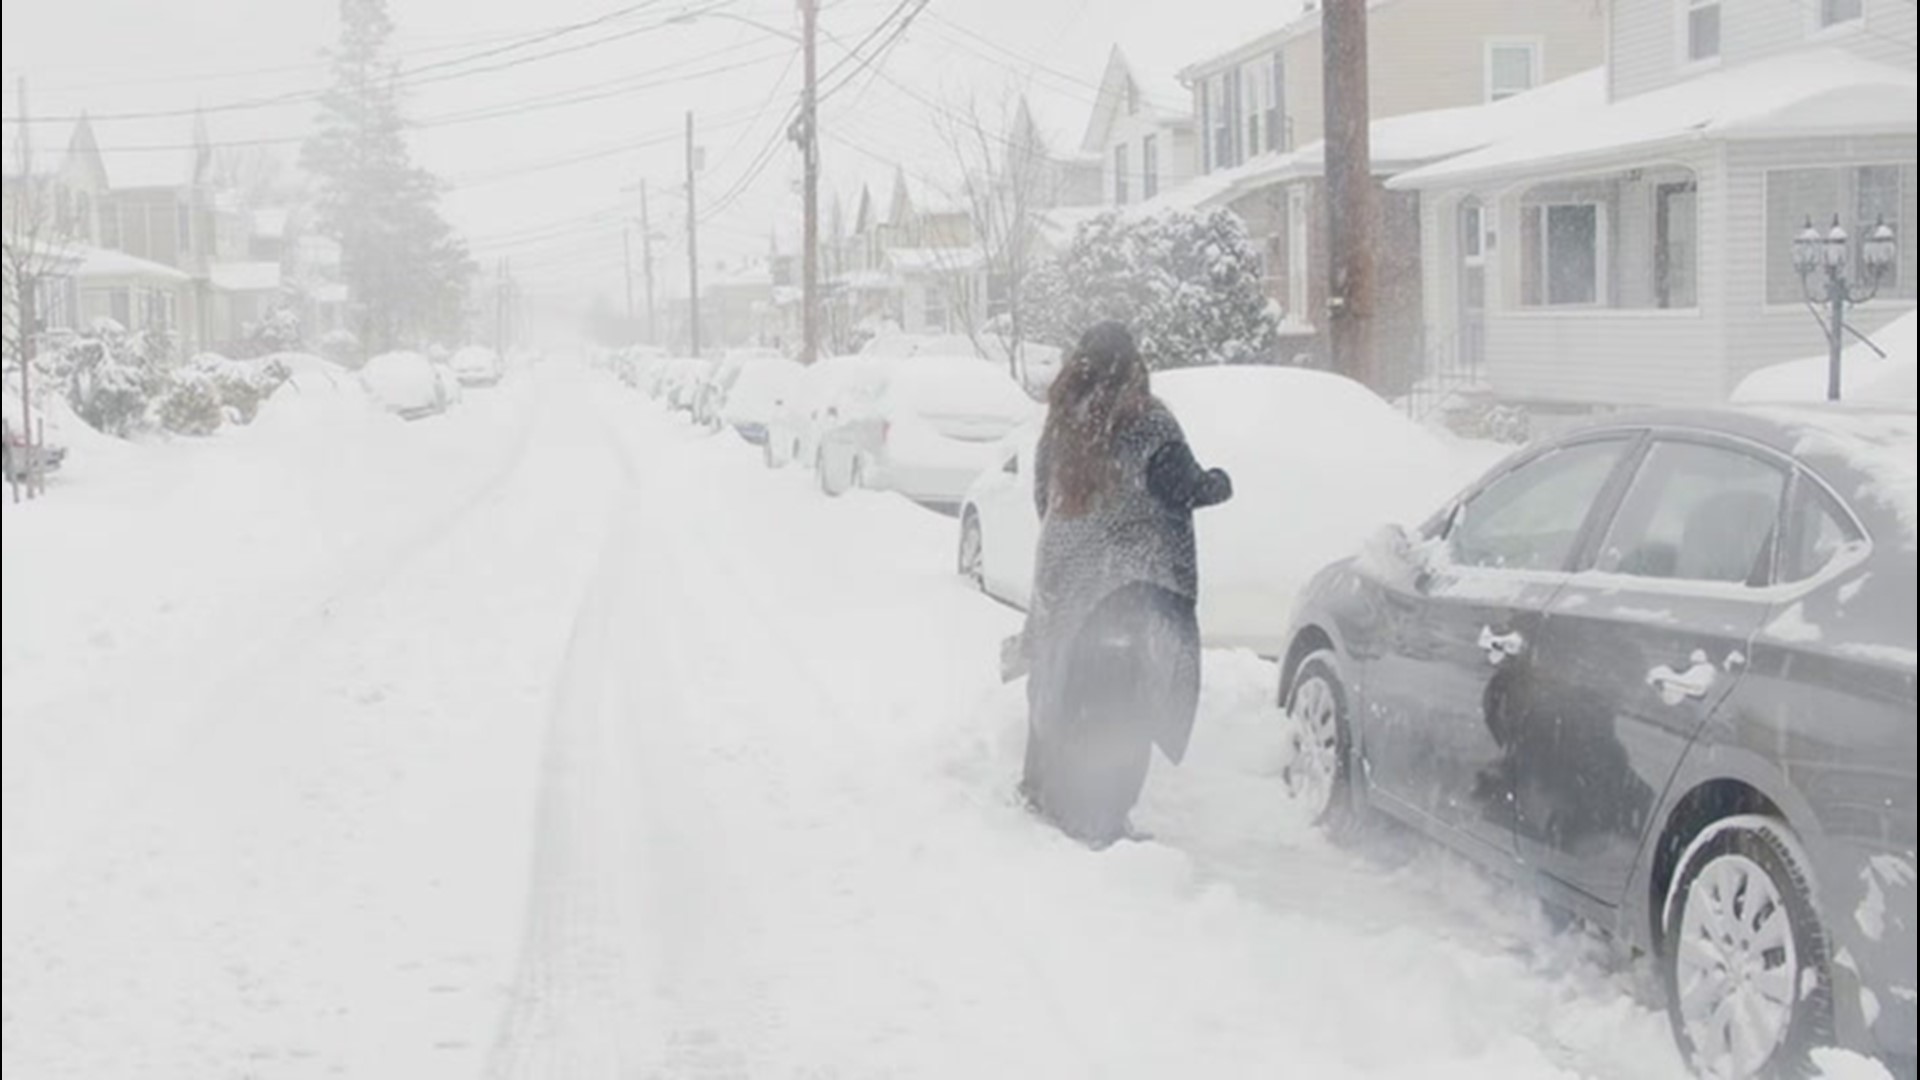 People across northern New Jersey spent their Monday digging out as a powerful nor'easter blanketed the area.